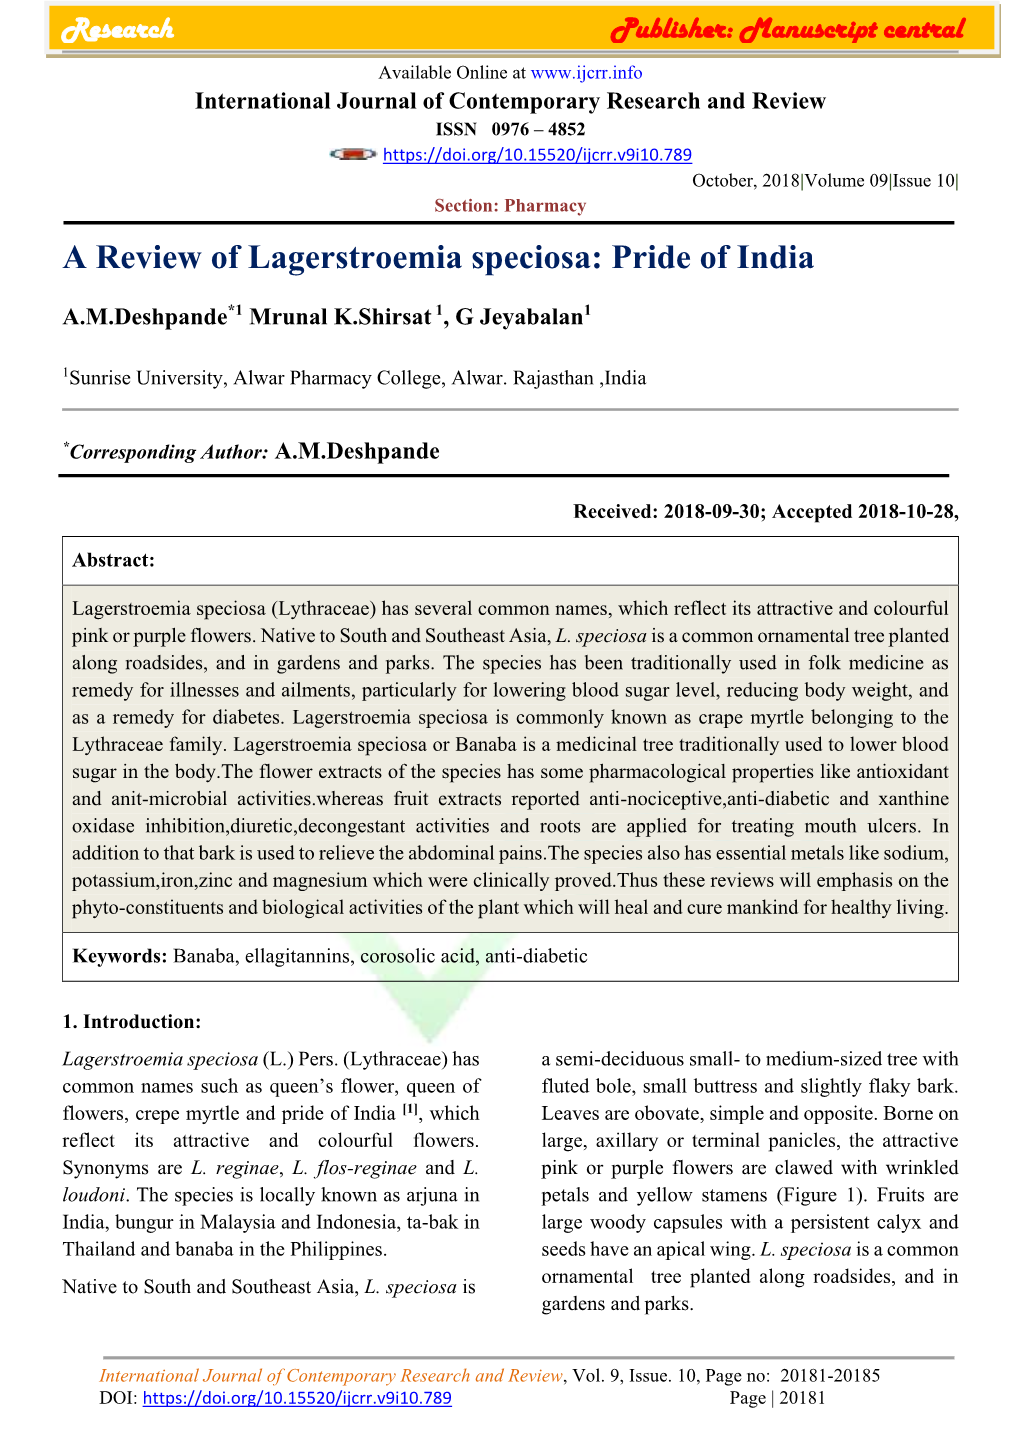 A Review of Lagerstroemia Speciosa: Pride of India